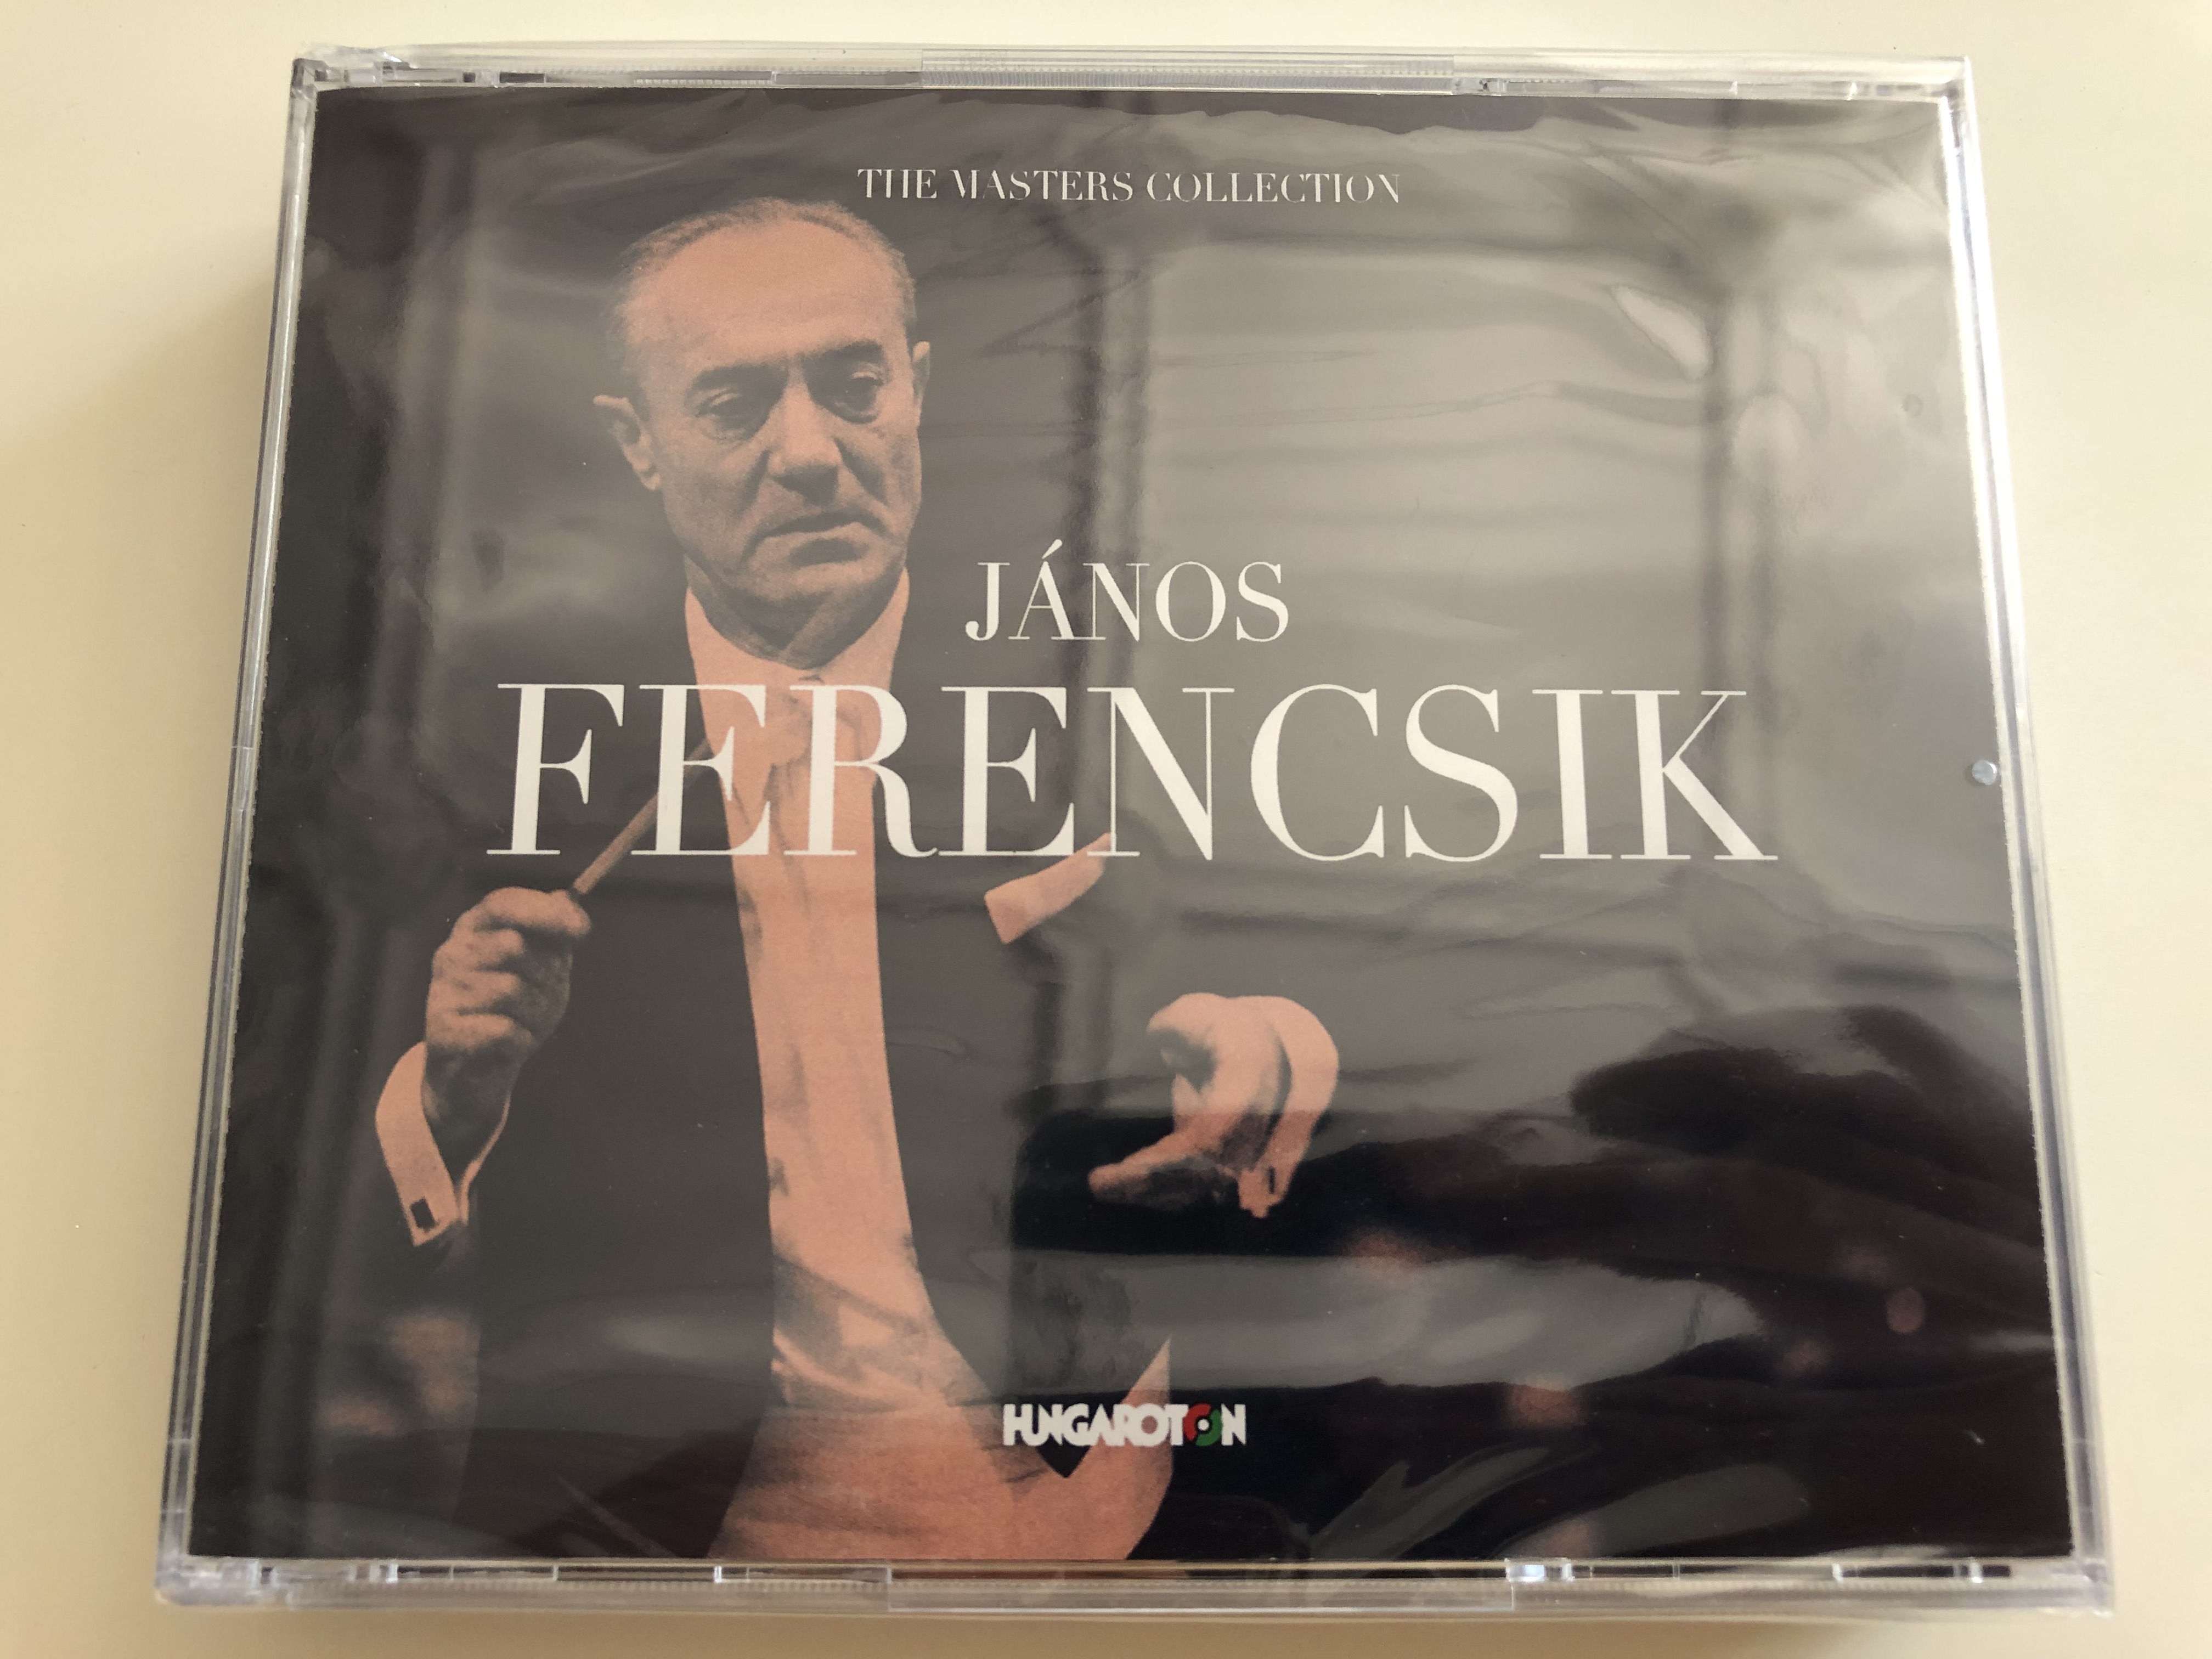 the-masters-collection-j-nos-ferencsik-iconic-recordings-of-the-most-renowned-artists-of-hungaroton-hcd-32820-22-3-cd-set-1-.jpg